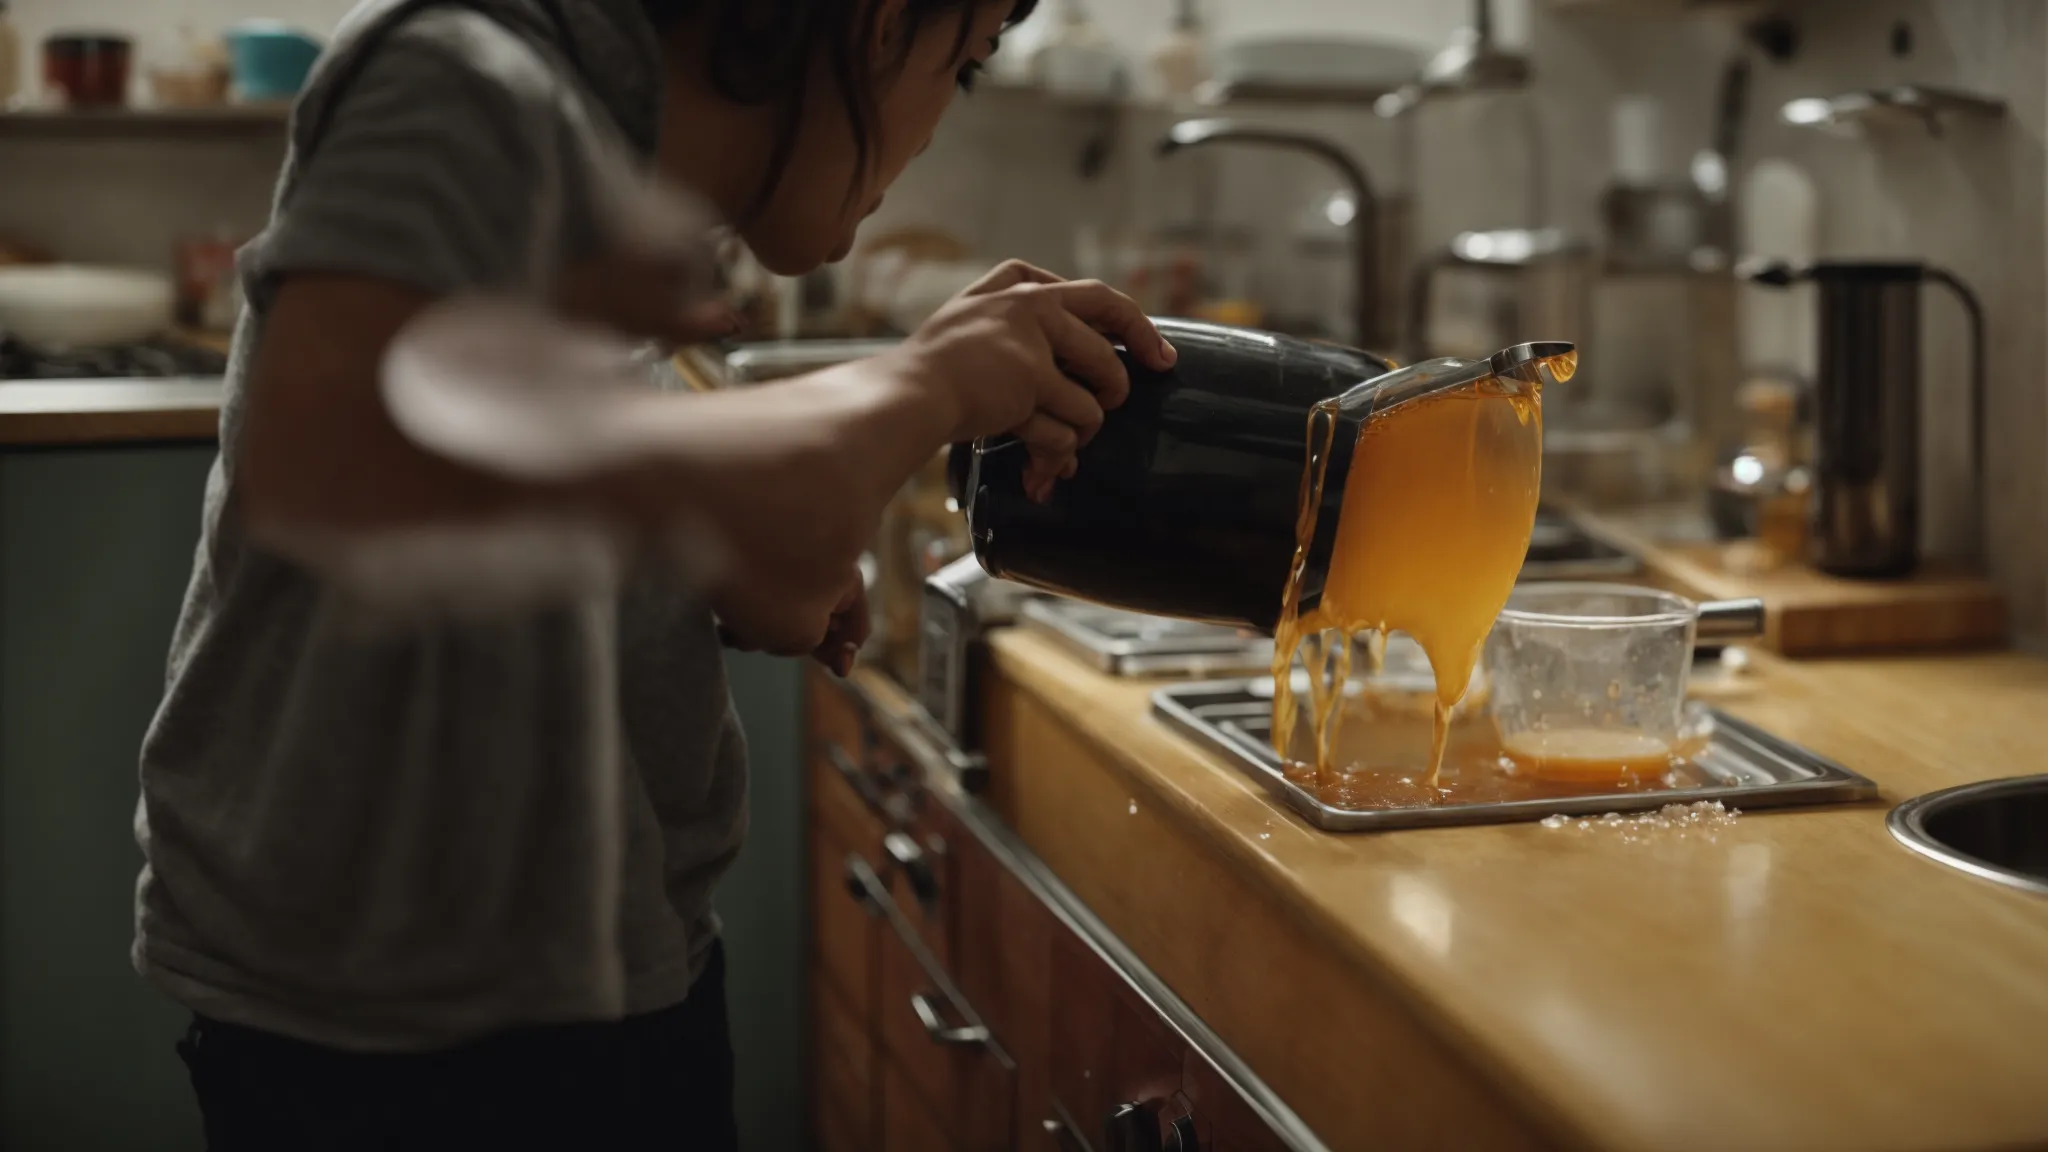 a kitchen scene where a person pours a homemade liquid solution onto a greasy stove.